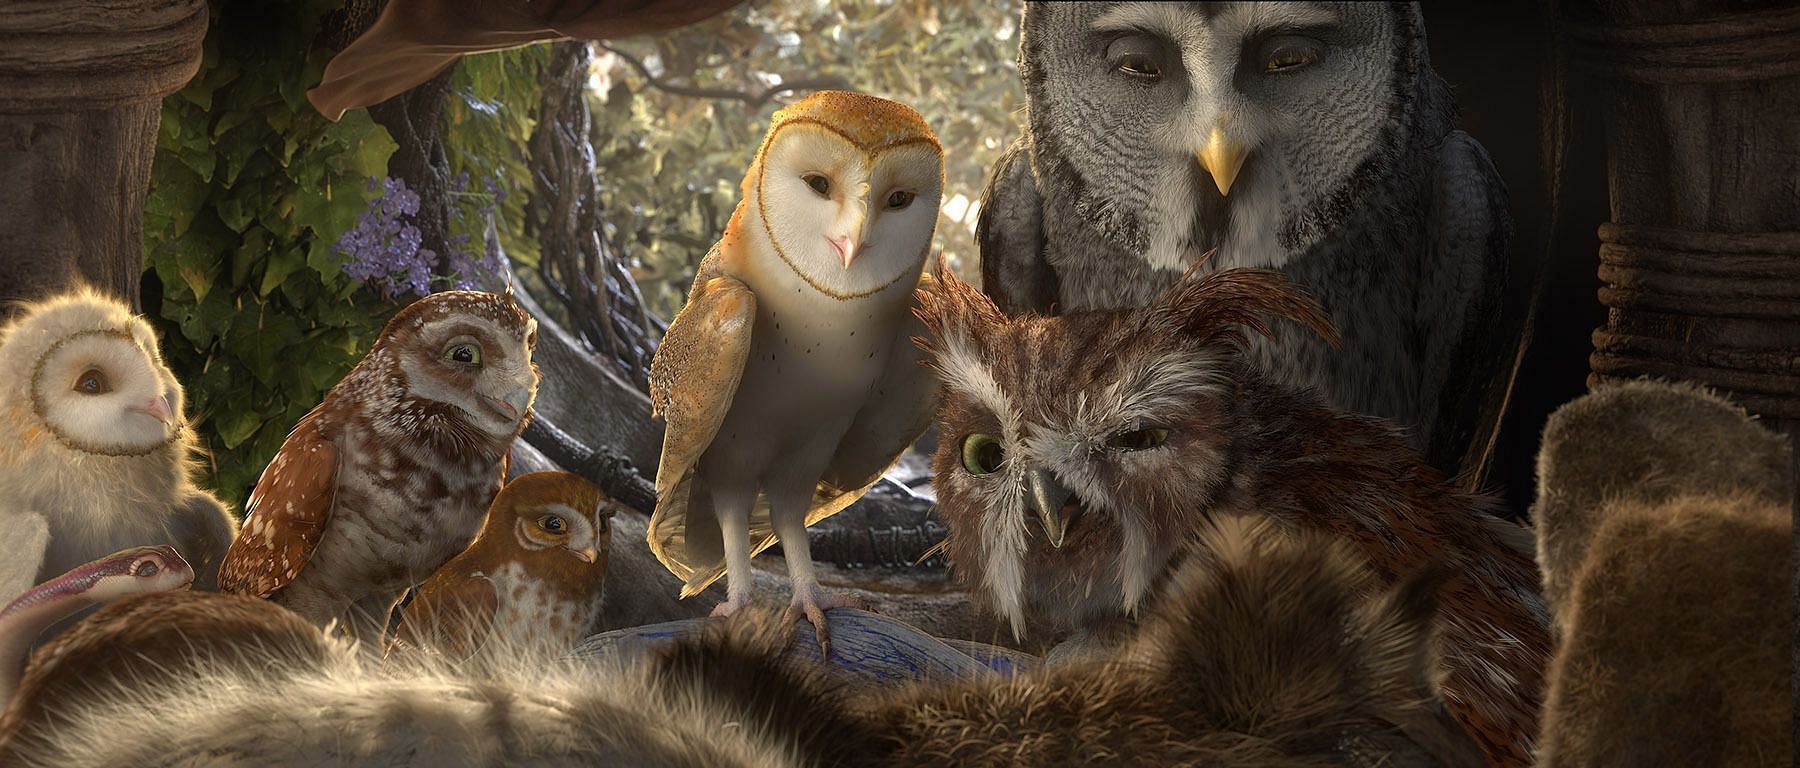 Legend of the Guardians: The Owls of Ga&#039;Hoole showcases Snyder&#039;s talent for creating breathtaking visuals and emotionally resonant storytelling in this animated adventure (Image via Warner Bros)